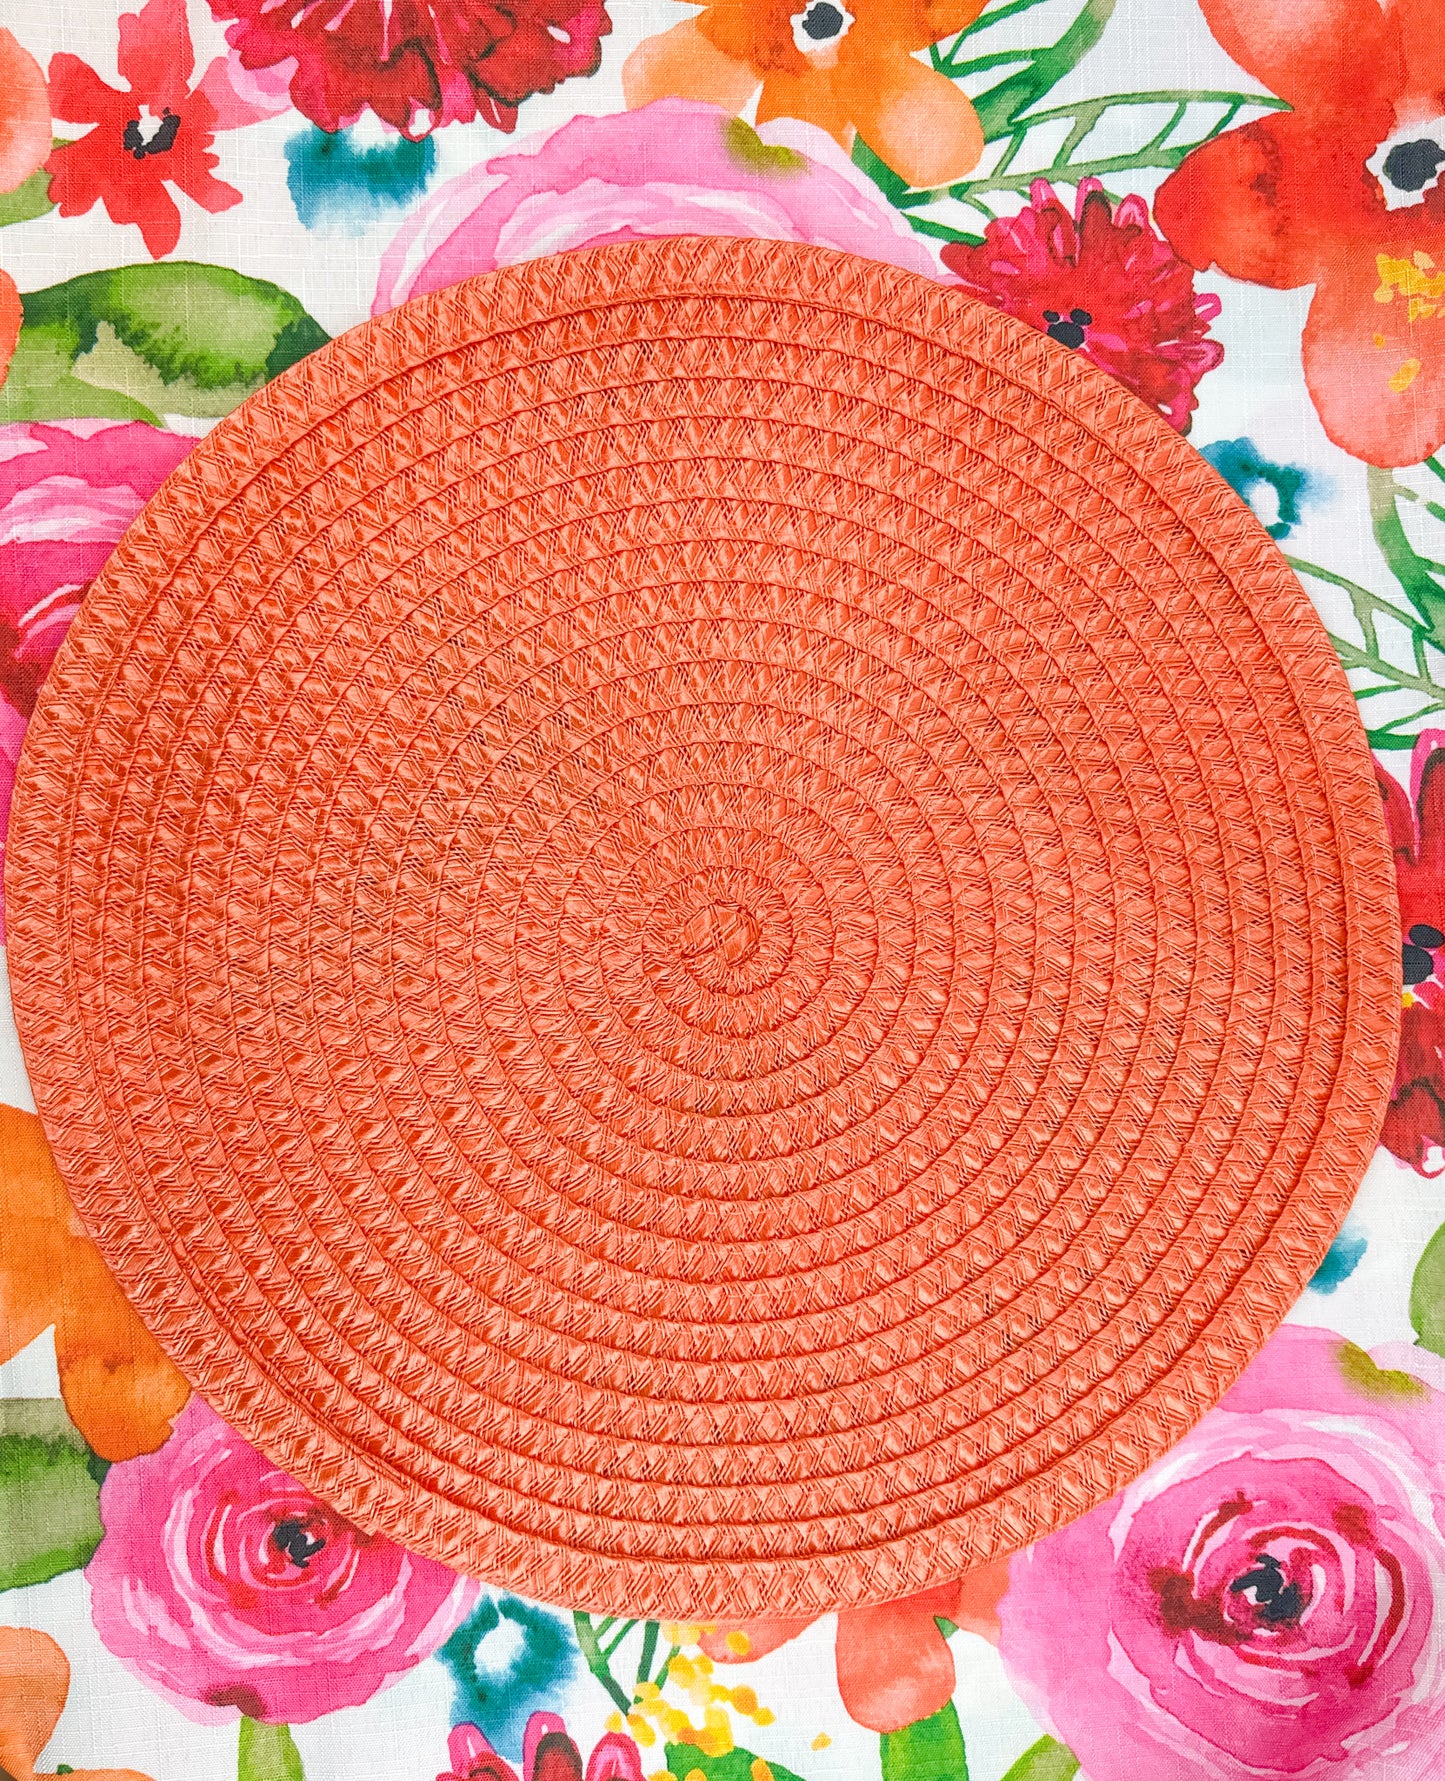 Round Placemat 83% polypropylene - 17% polyester, Persimmon, 15"